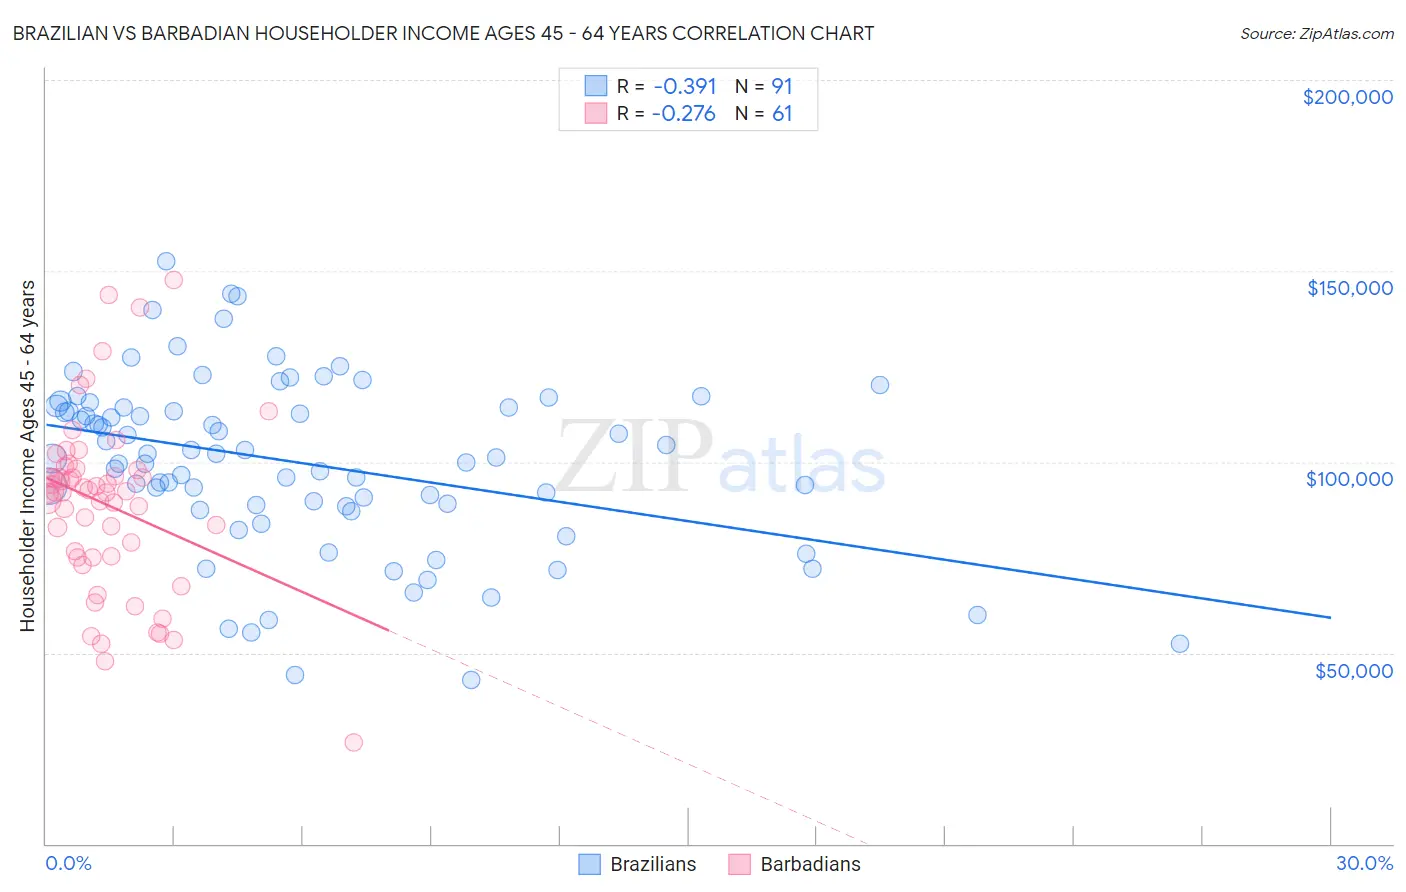 Brazilian vs Barbadian Householder Income Ages 45 - 64 years